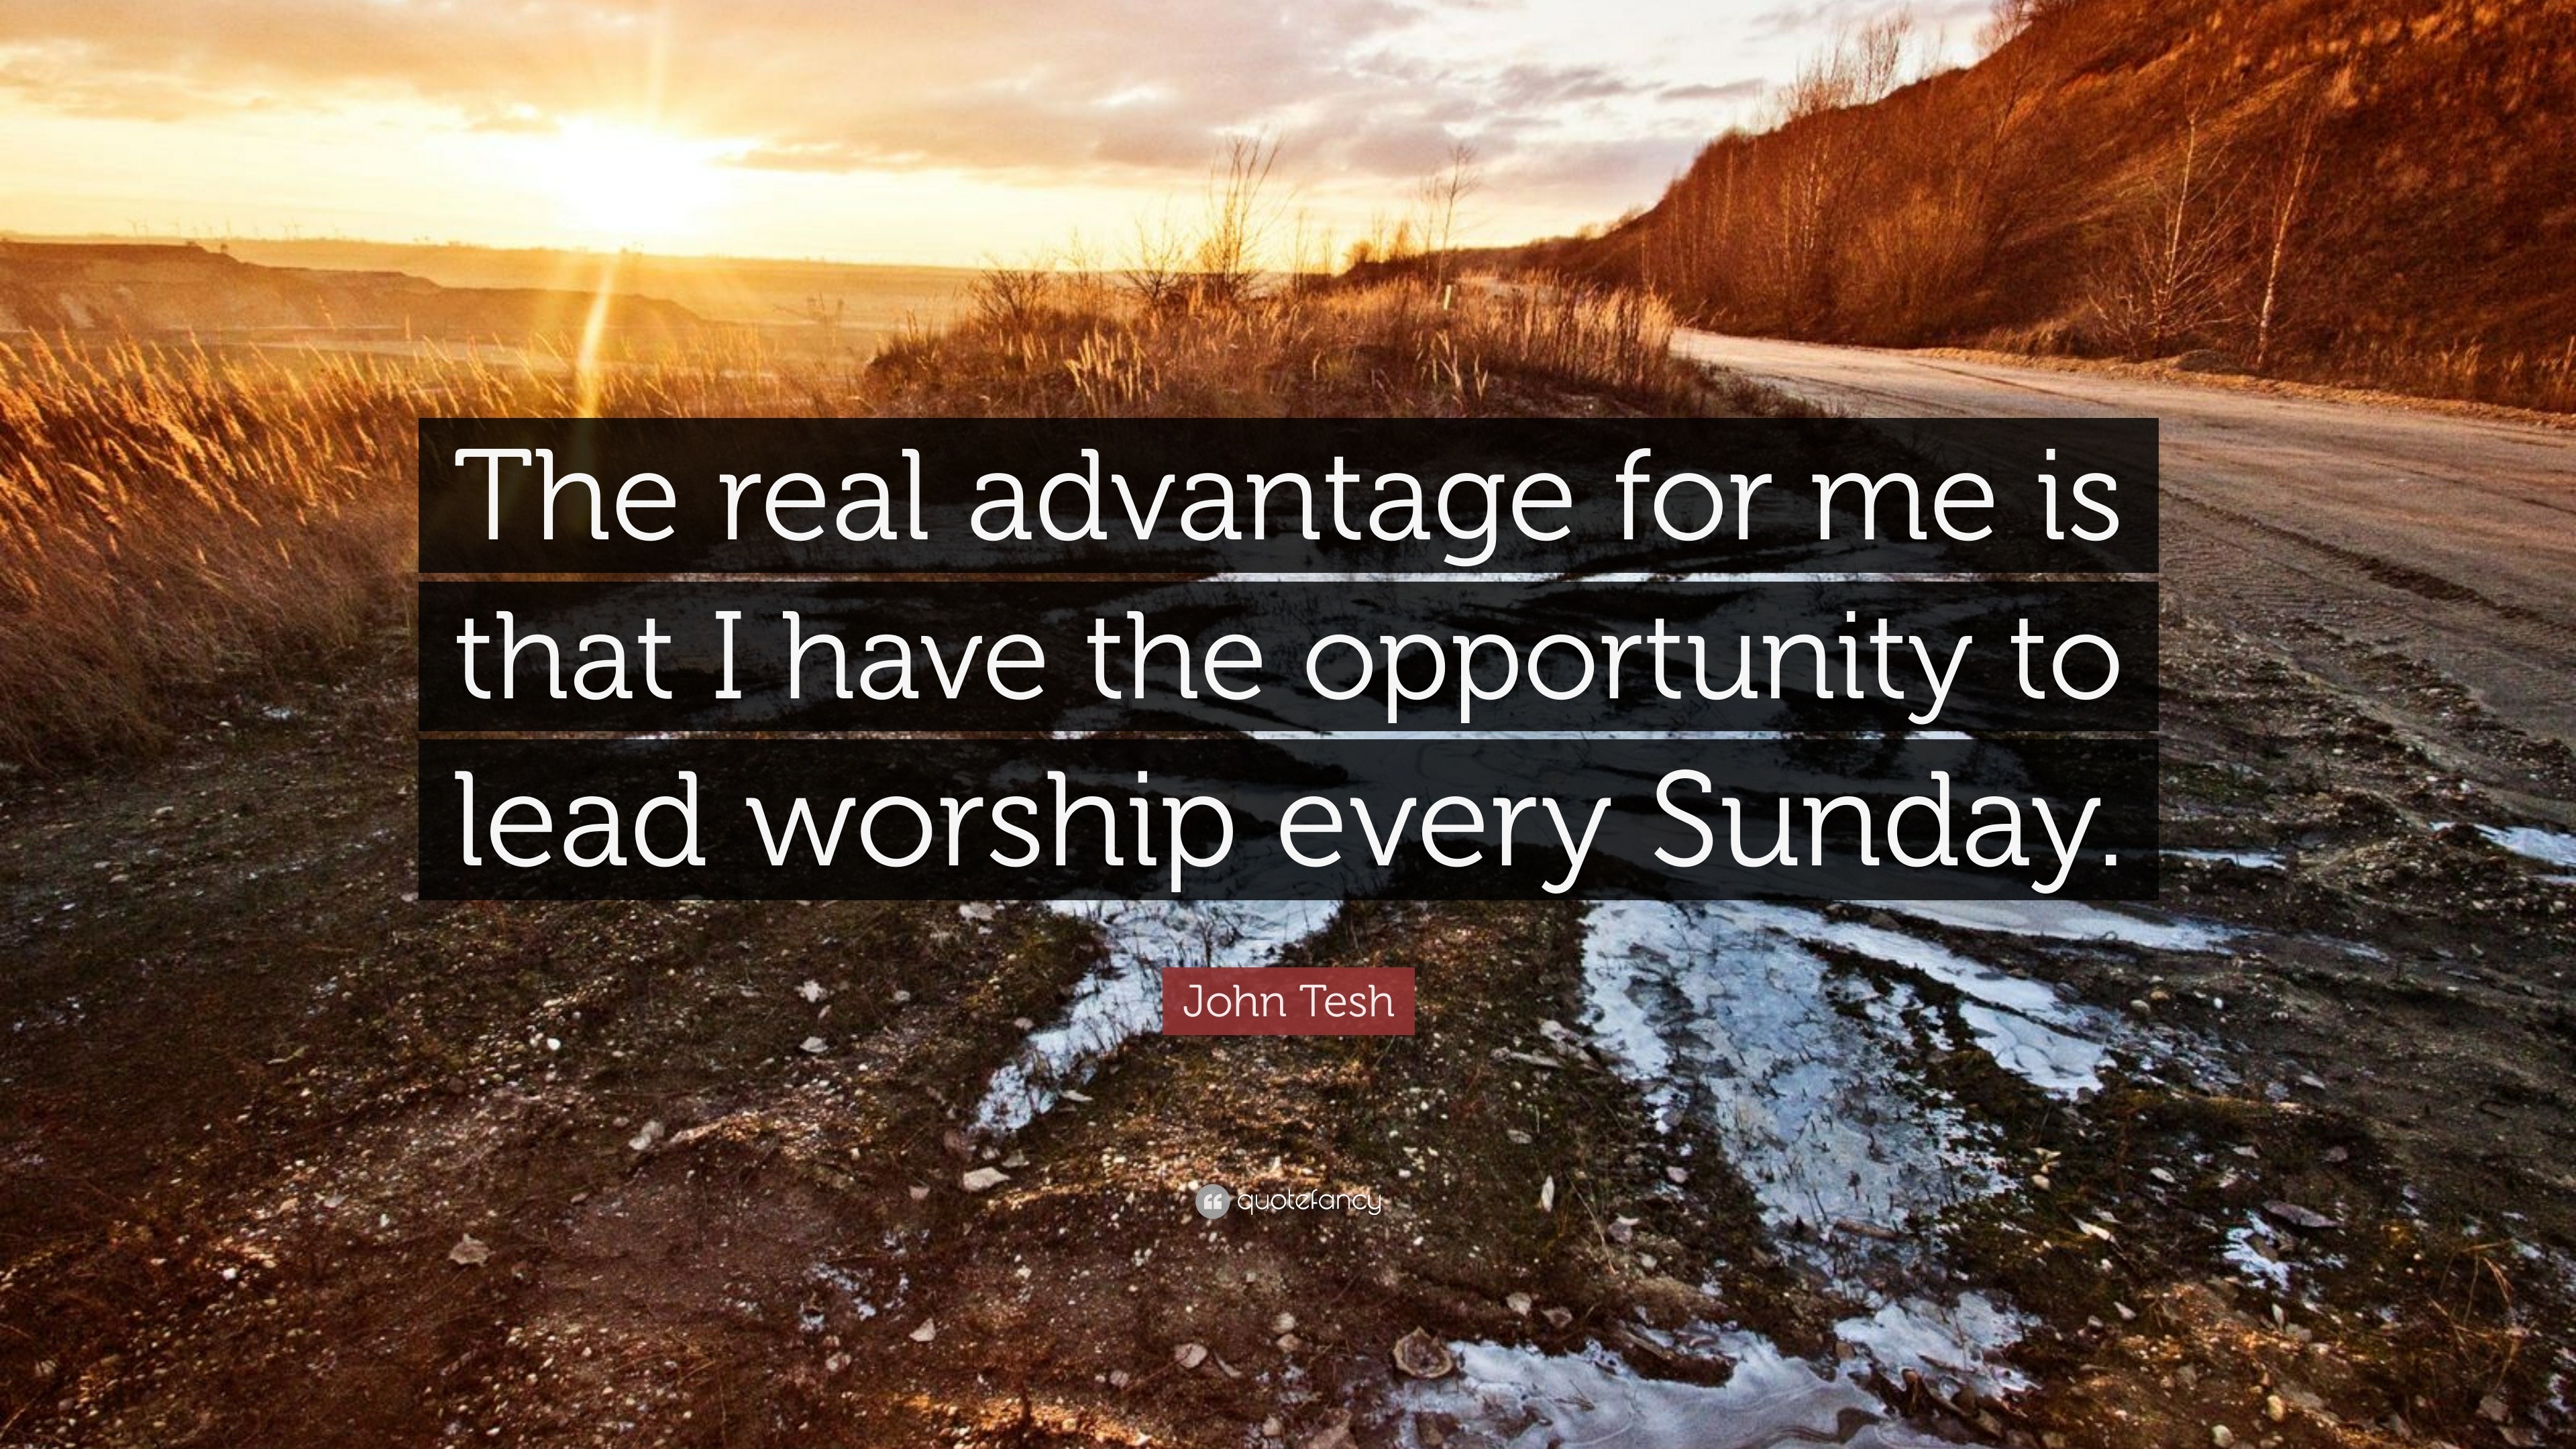 John Tesh Quote: “The real advantage for me is that I have the ...